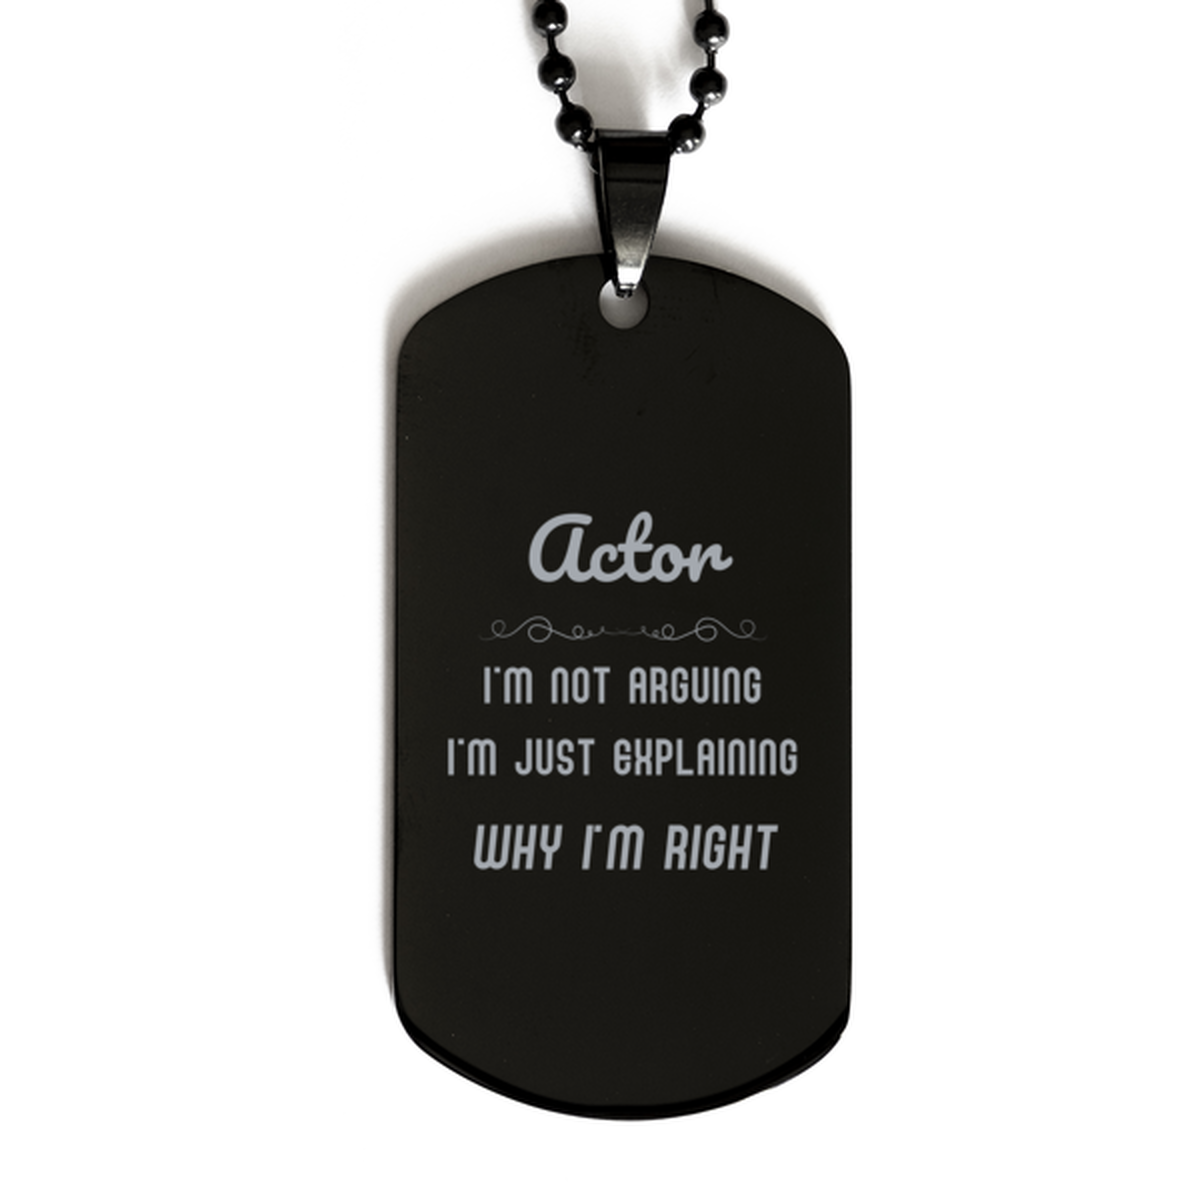 Actor I'm not Arguing. I'm Just Explaining Why I'm RIGHT Black Dog Tag, Funny Saying Quote Actor Gifts For Actor Graduation Birthday Christmas Gifts for Men Women Coworker